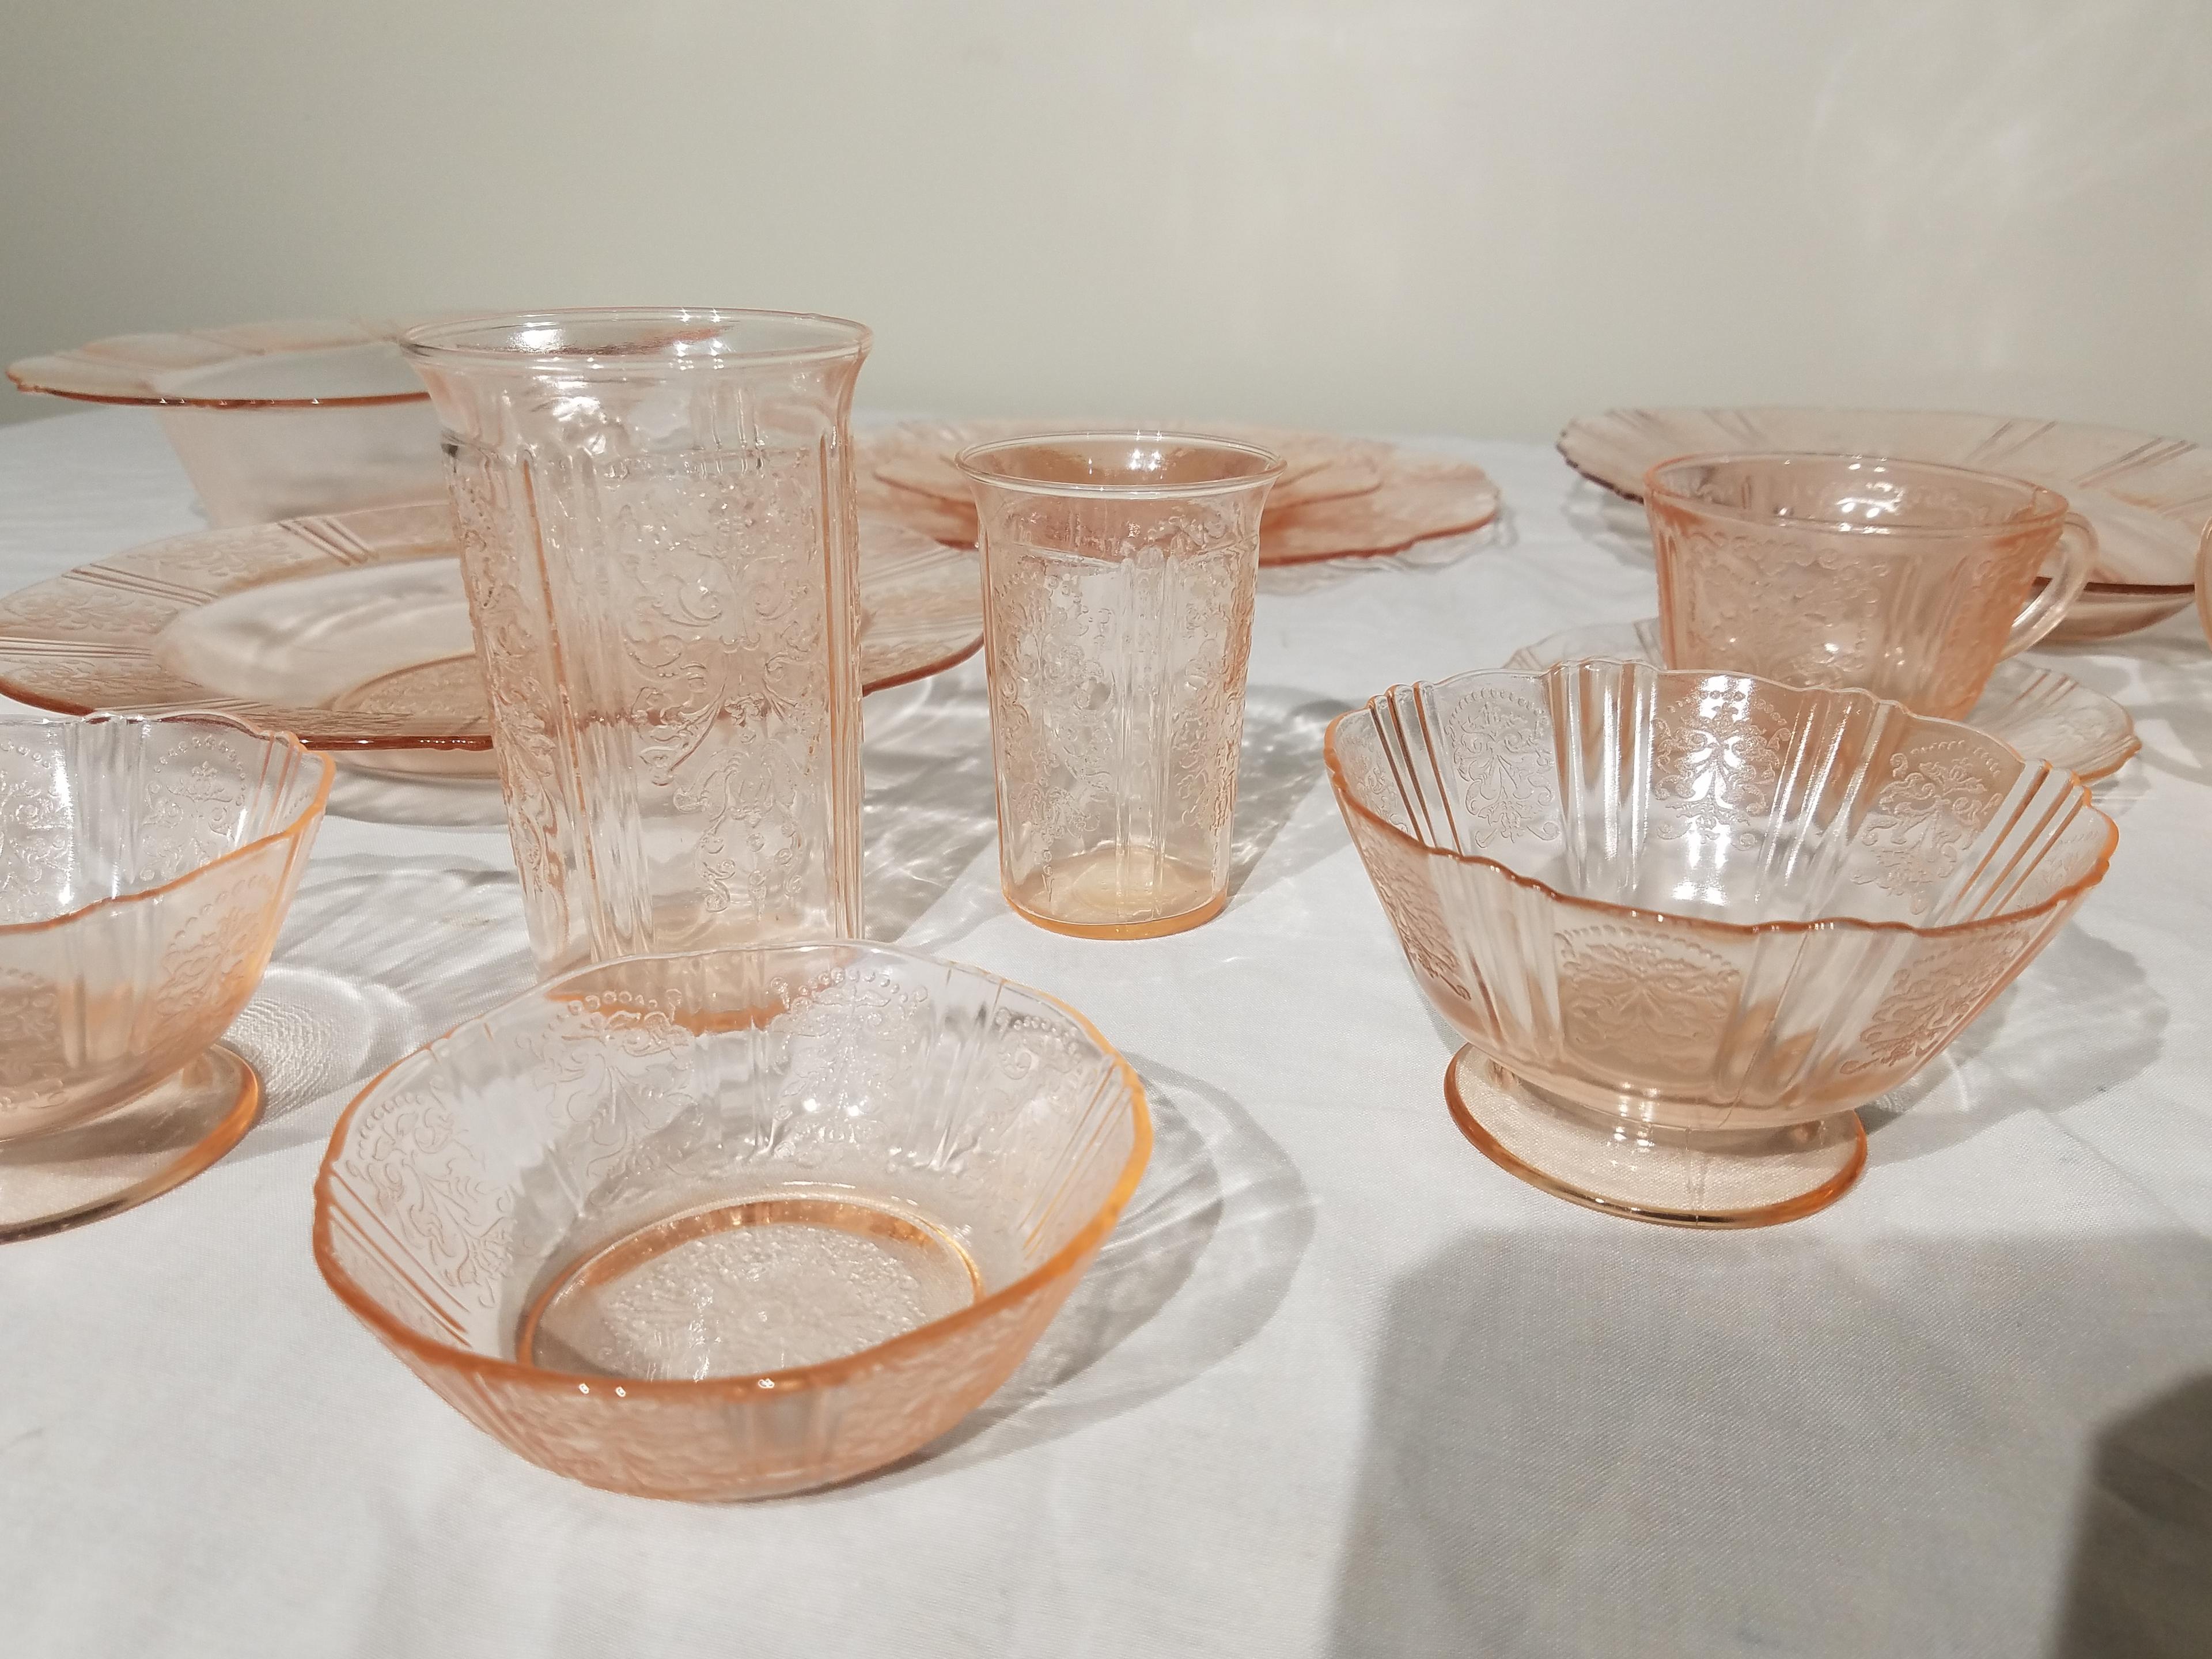 Large Collection of American Sweetheart Dishes